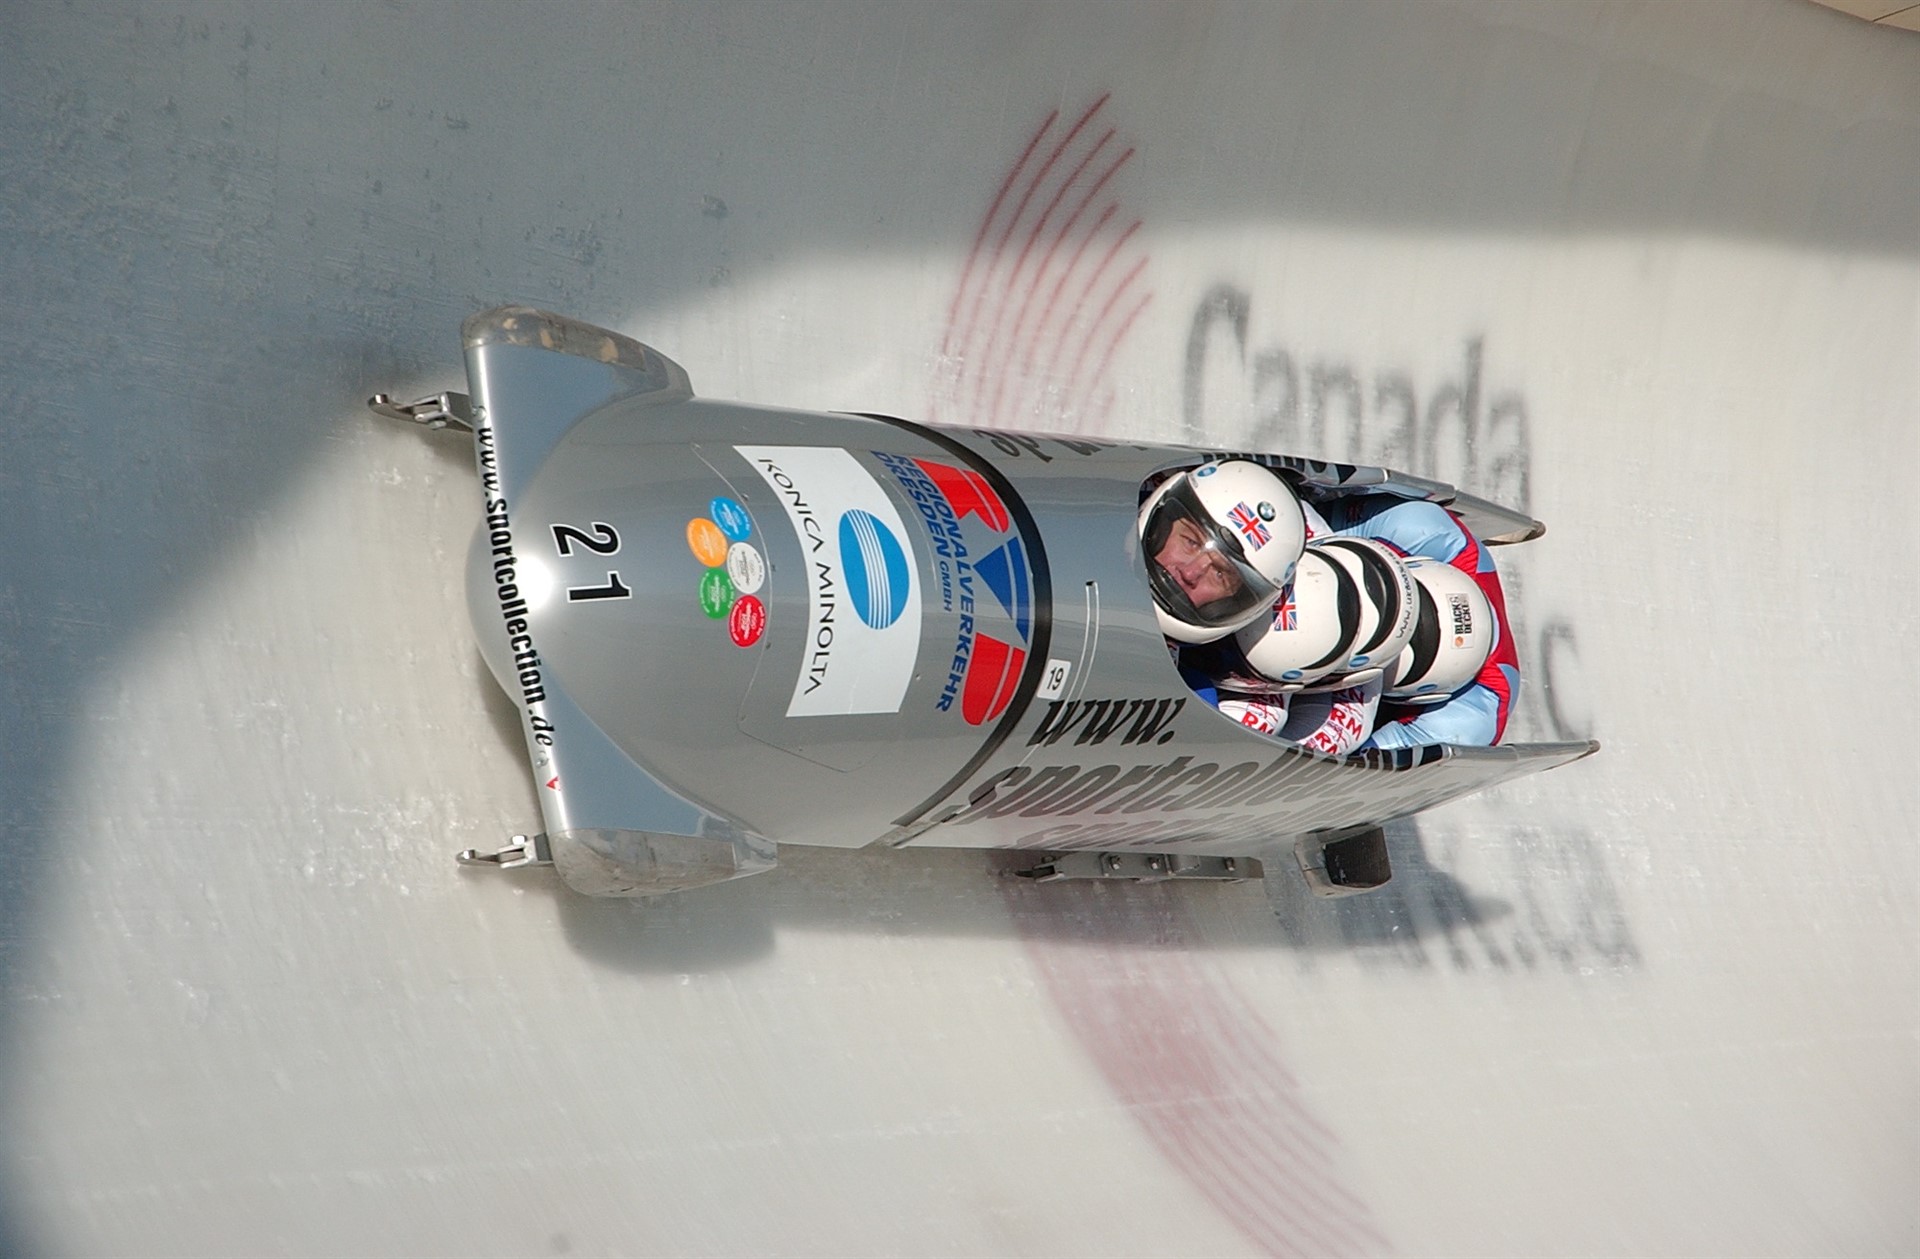 OLYMPIC BOBSLEIGH EXPERIENCE FOR 4 PEOPLE